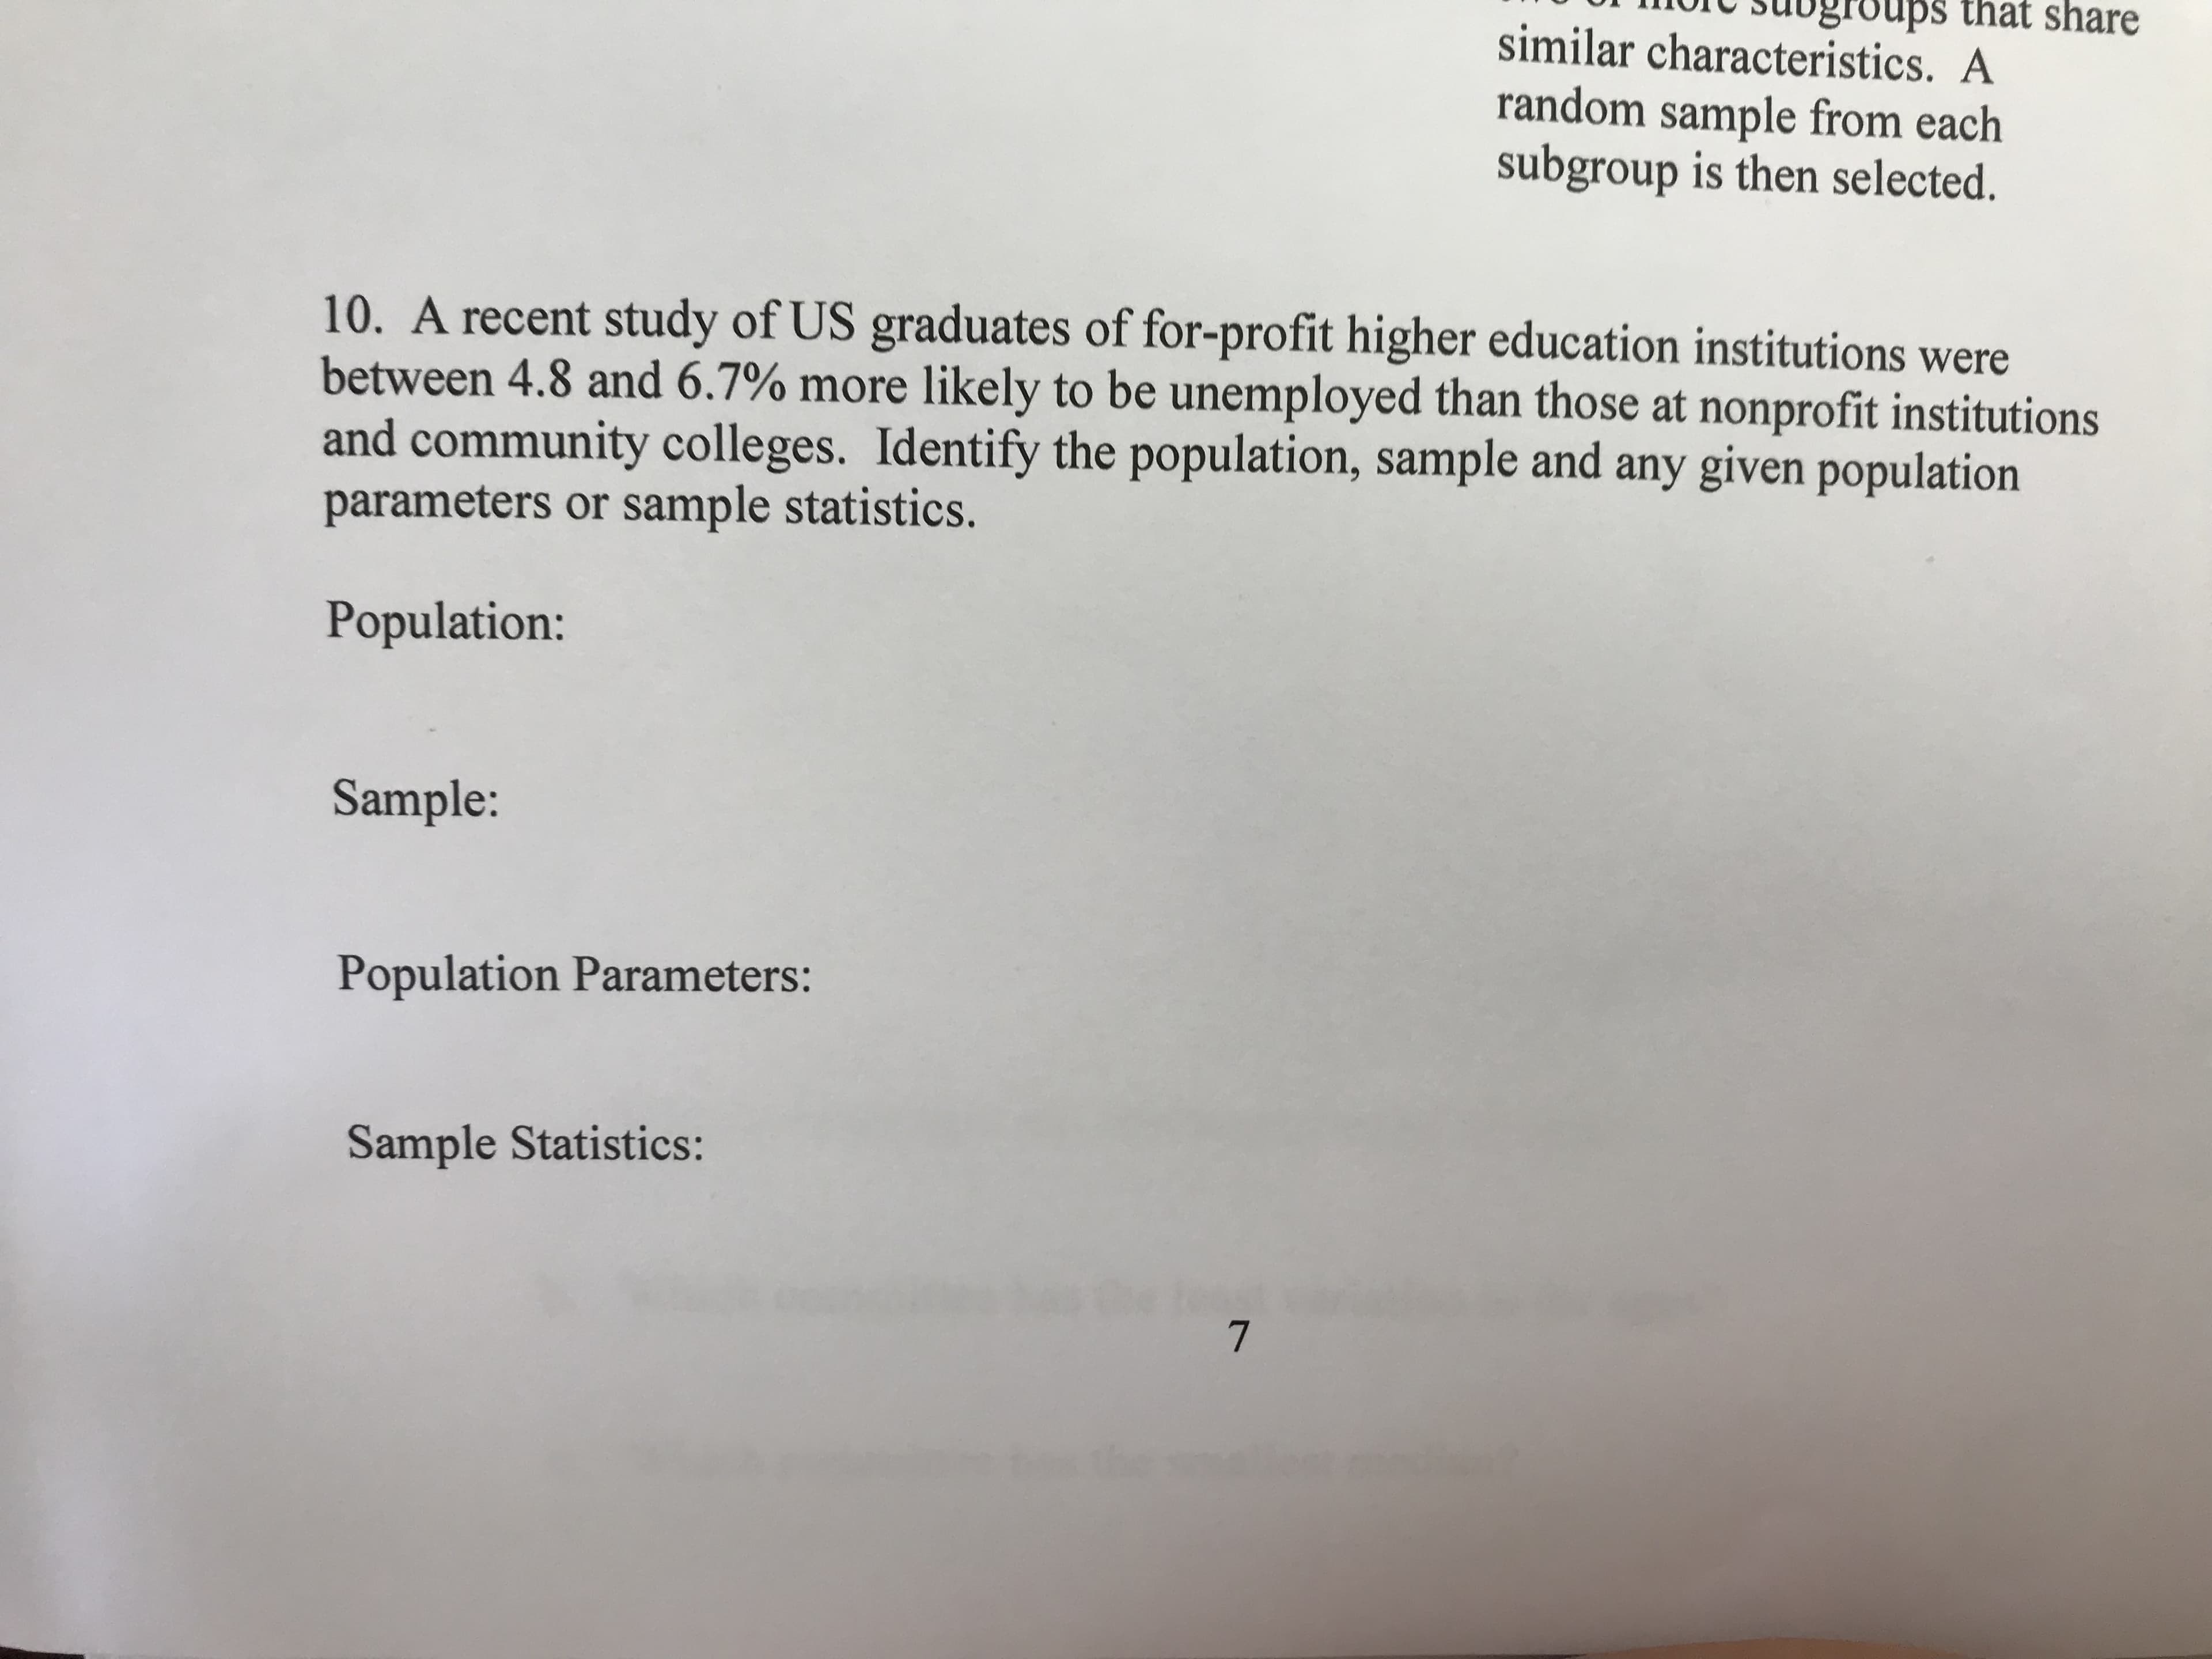 that share
similar characteristics. A
random sample from each
subgroup is then selected.
10. A recent study of US graduates of for-profit higher education institutions were
between 4.8 and 6.7% more likely to be unemployed than those at nonprofit institutions
and community colleges. Identify the population, sample and any given population
parameters or sample statistics.
Population:
Sample:
Population Parameters:
Sample Statistics:
7
